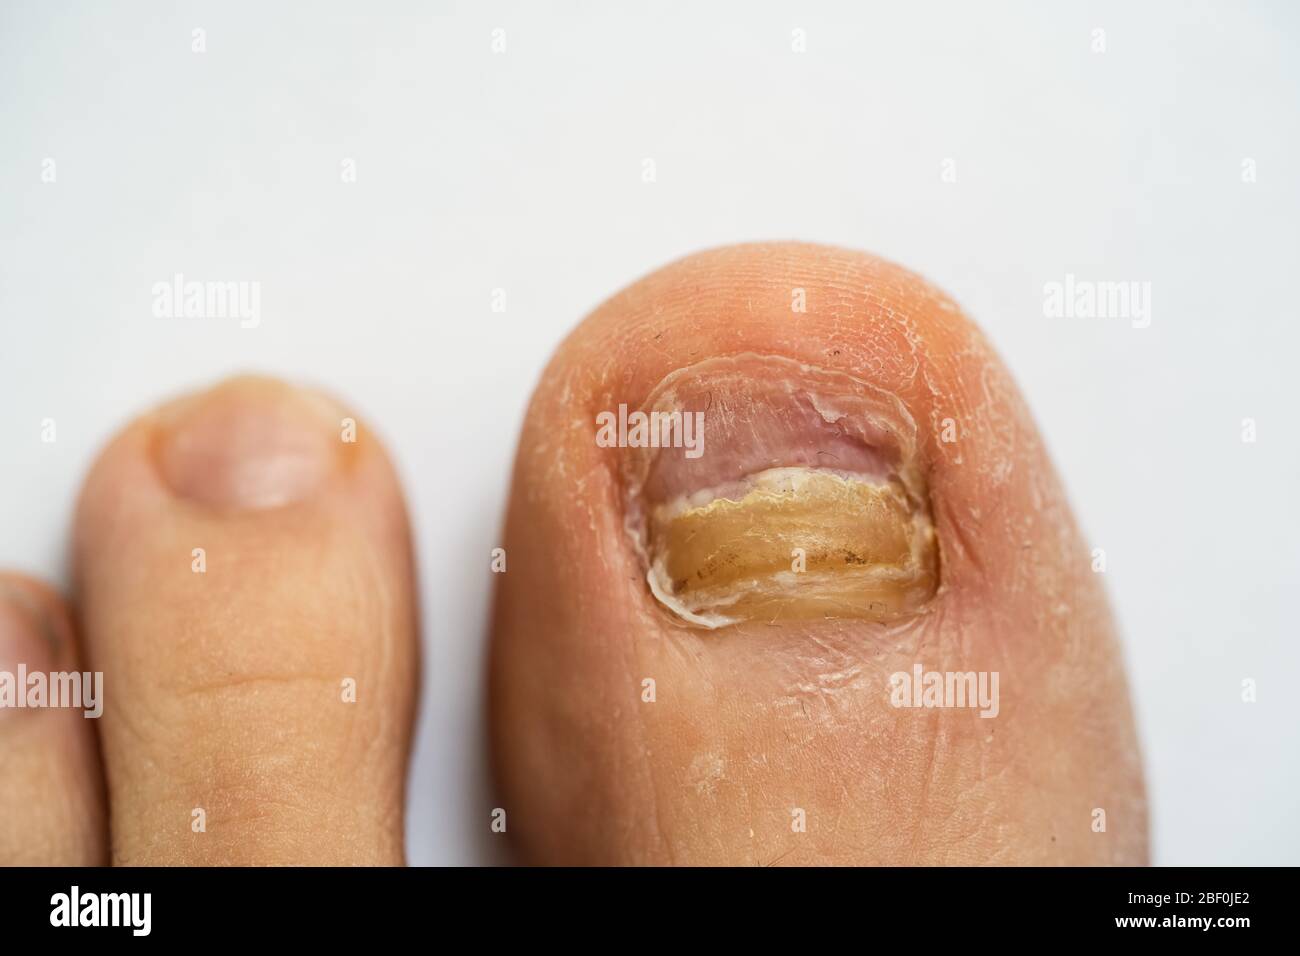 HOW TO TREAT FUNGAL NAIL INFECTION - TINEA UNGUIUM / ONYCHOMYCOSIS - YouTube